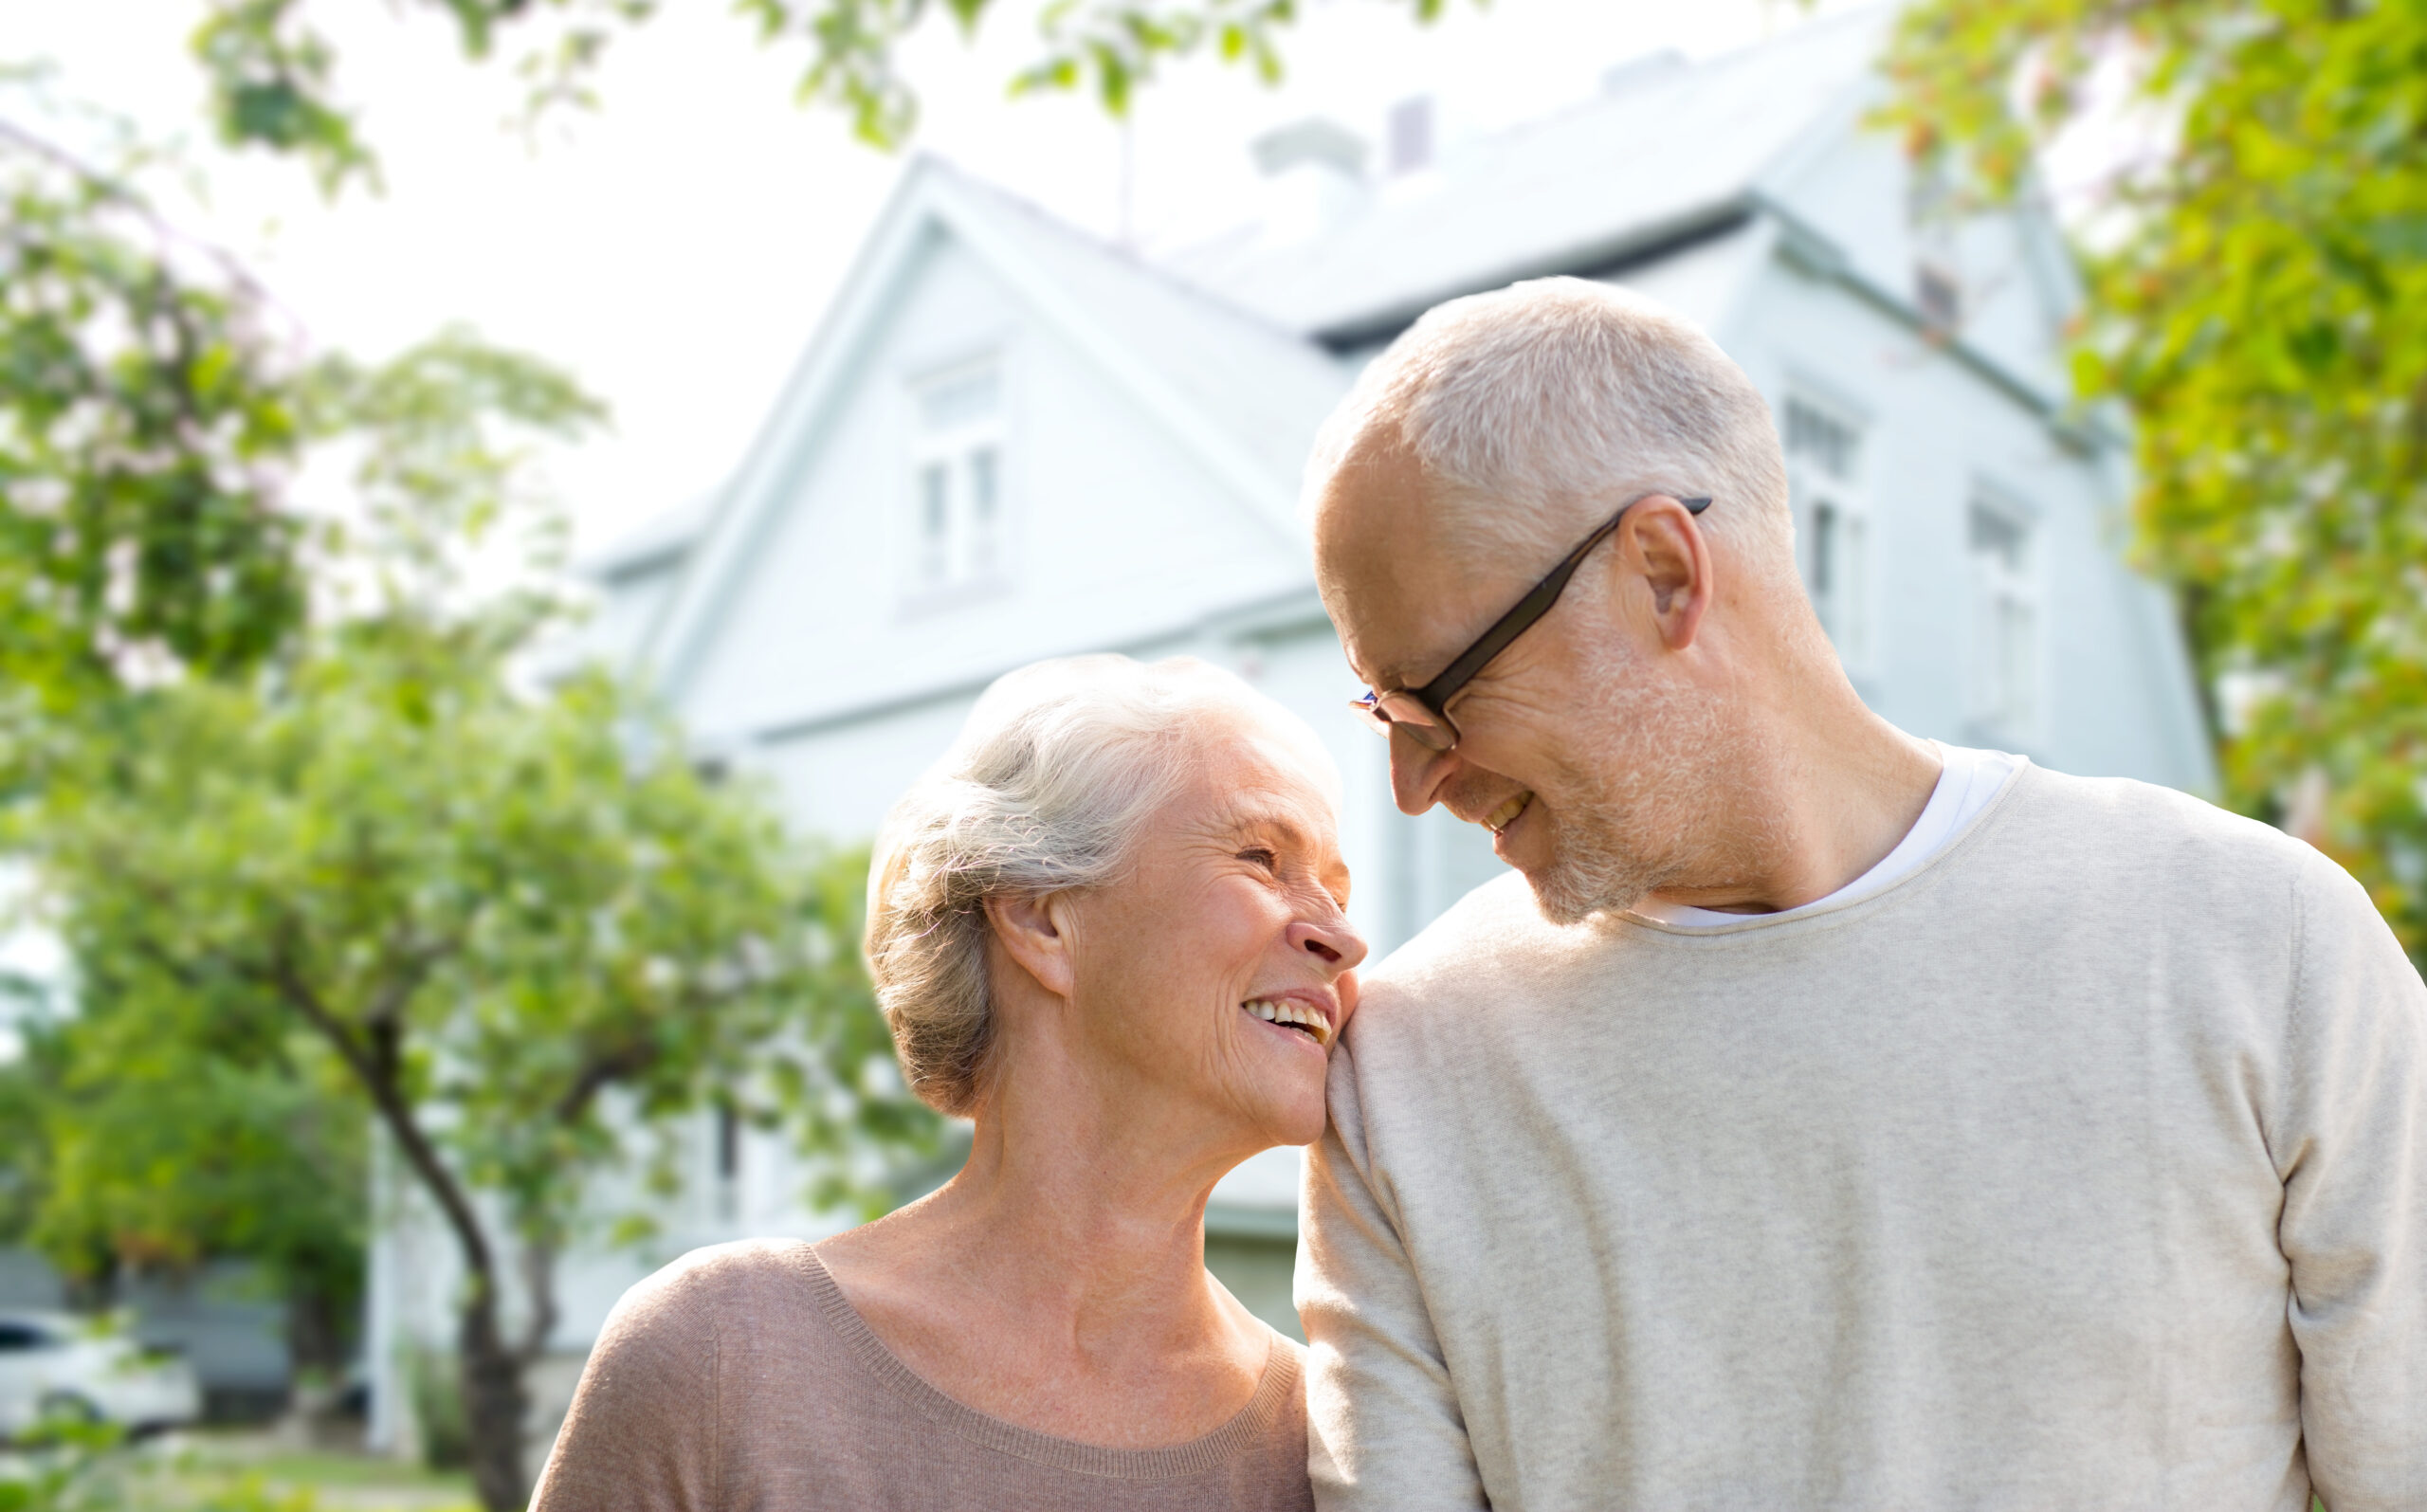 is home health care the right choice?